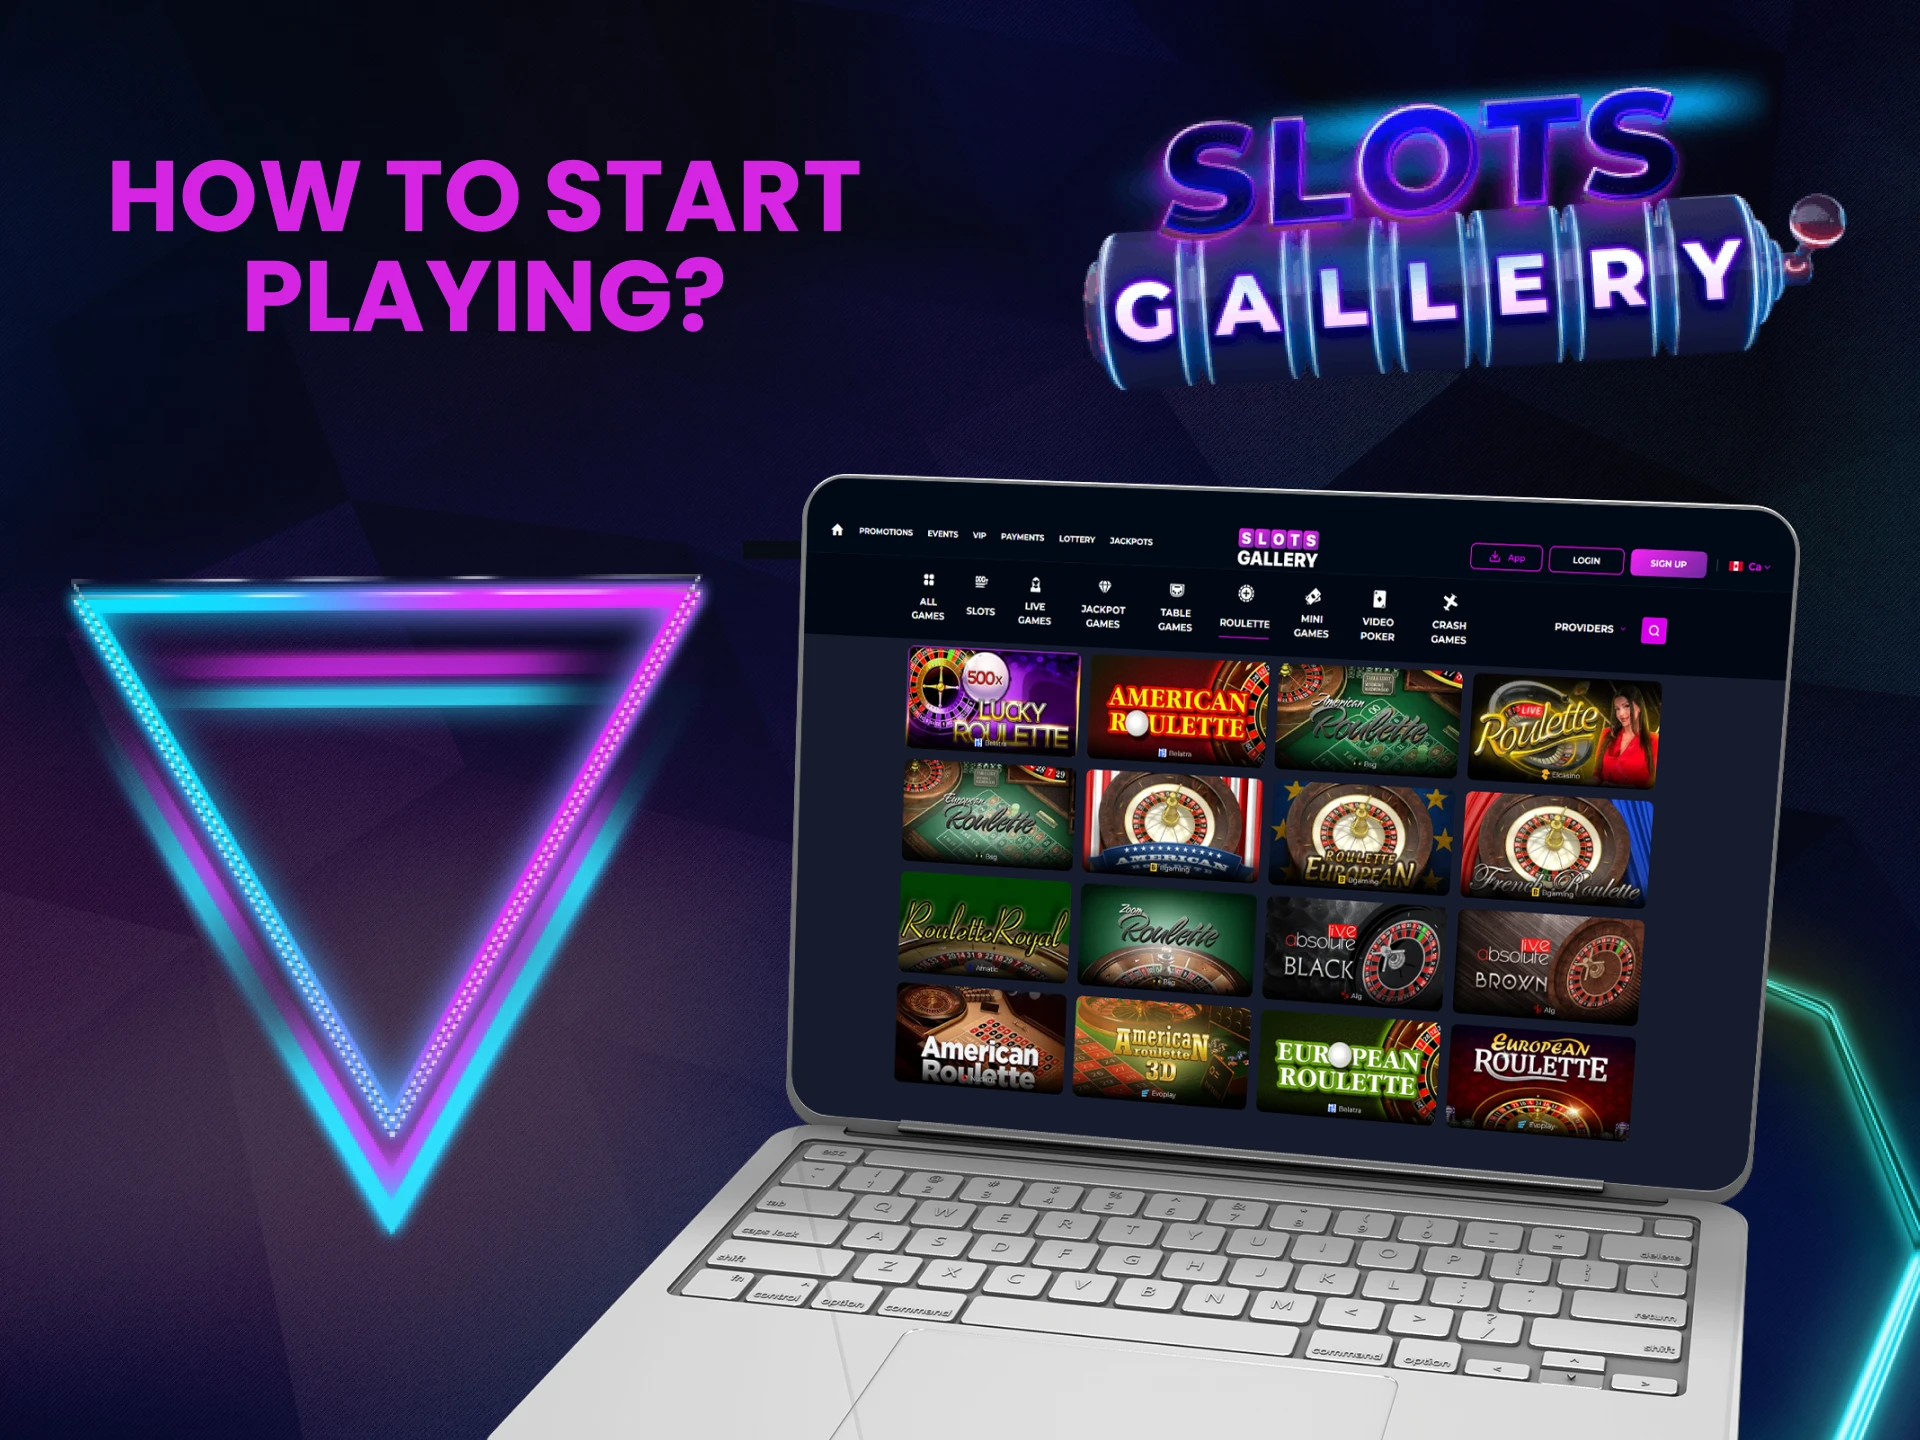 Choose roulette in the casino section of Slots Gallery.